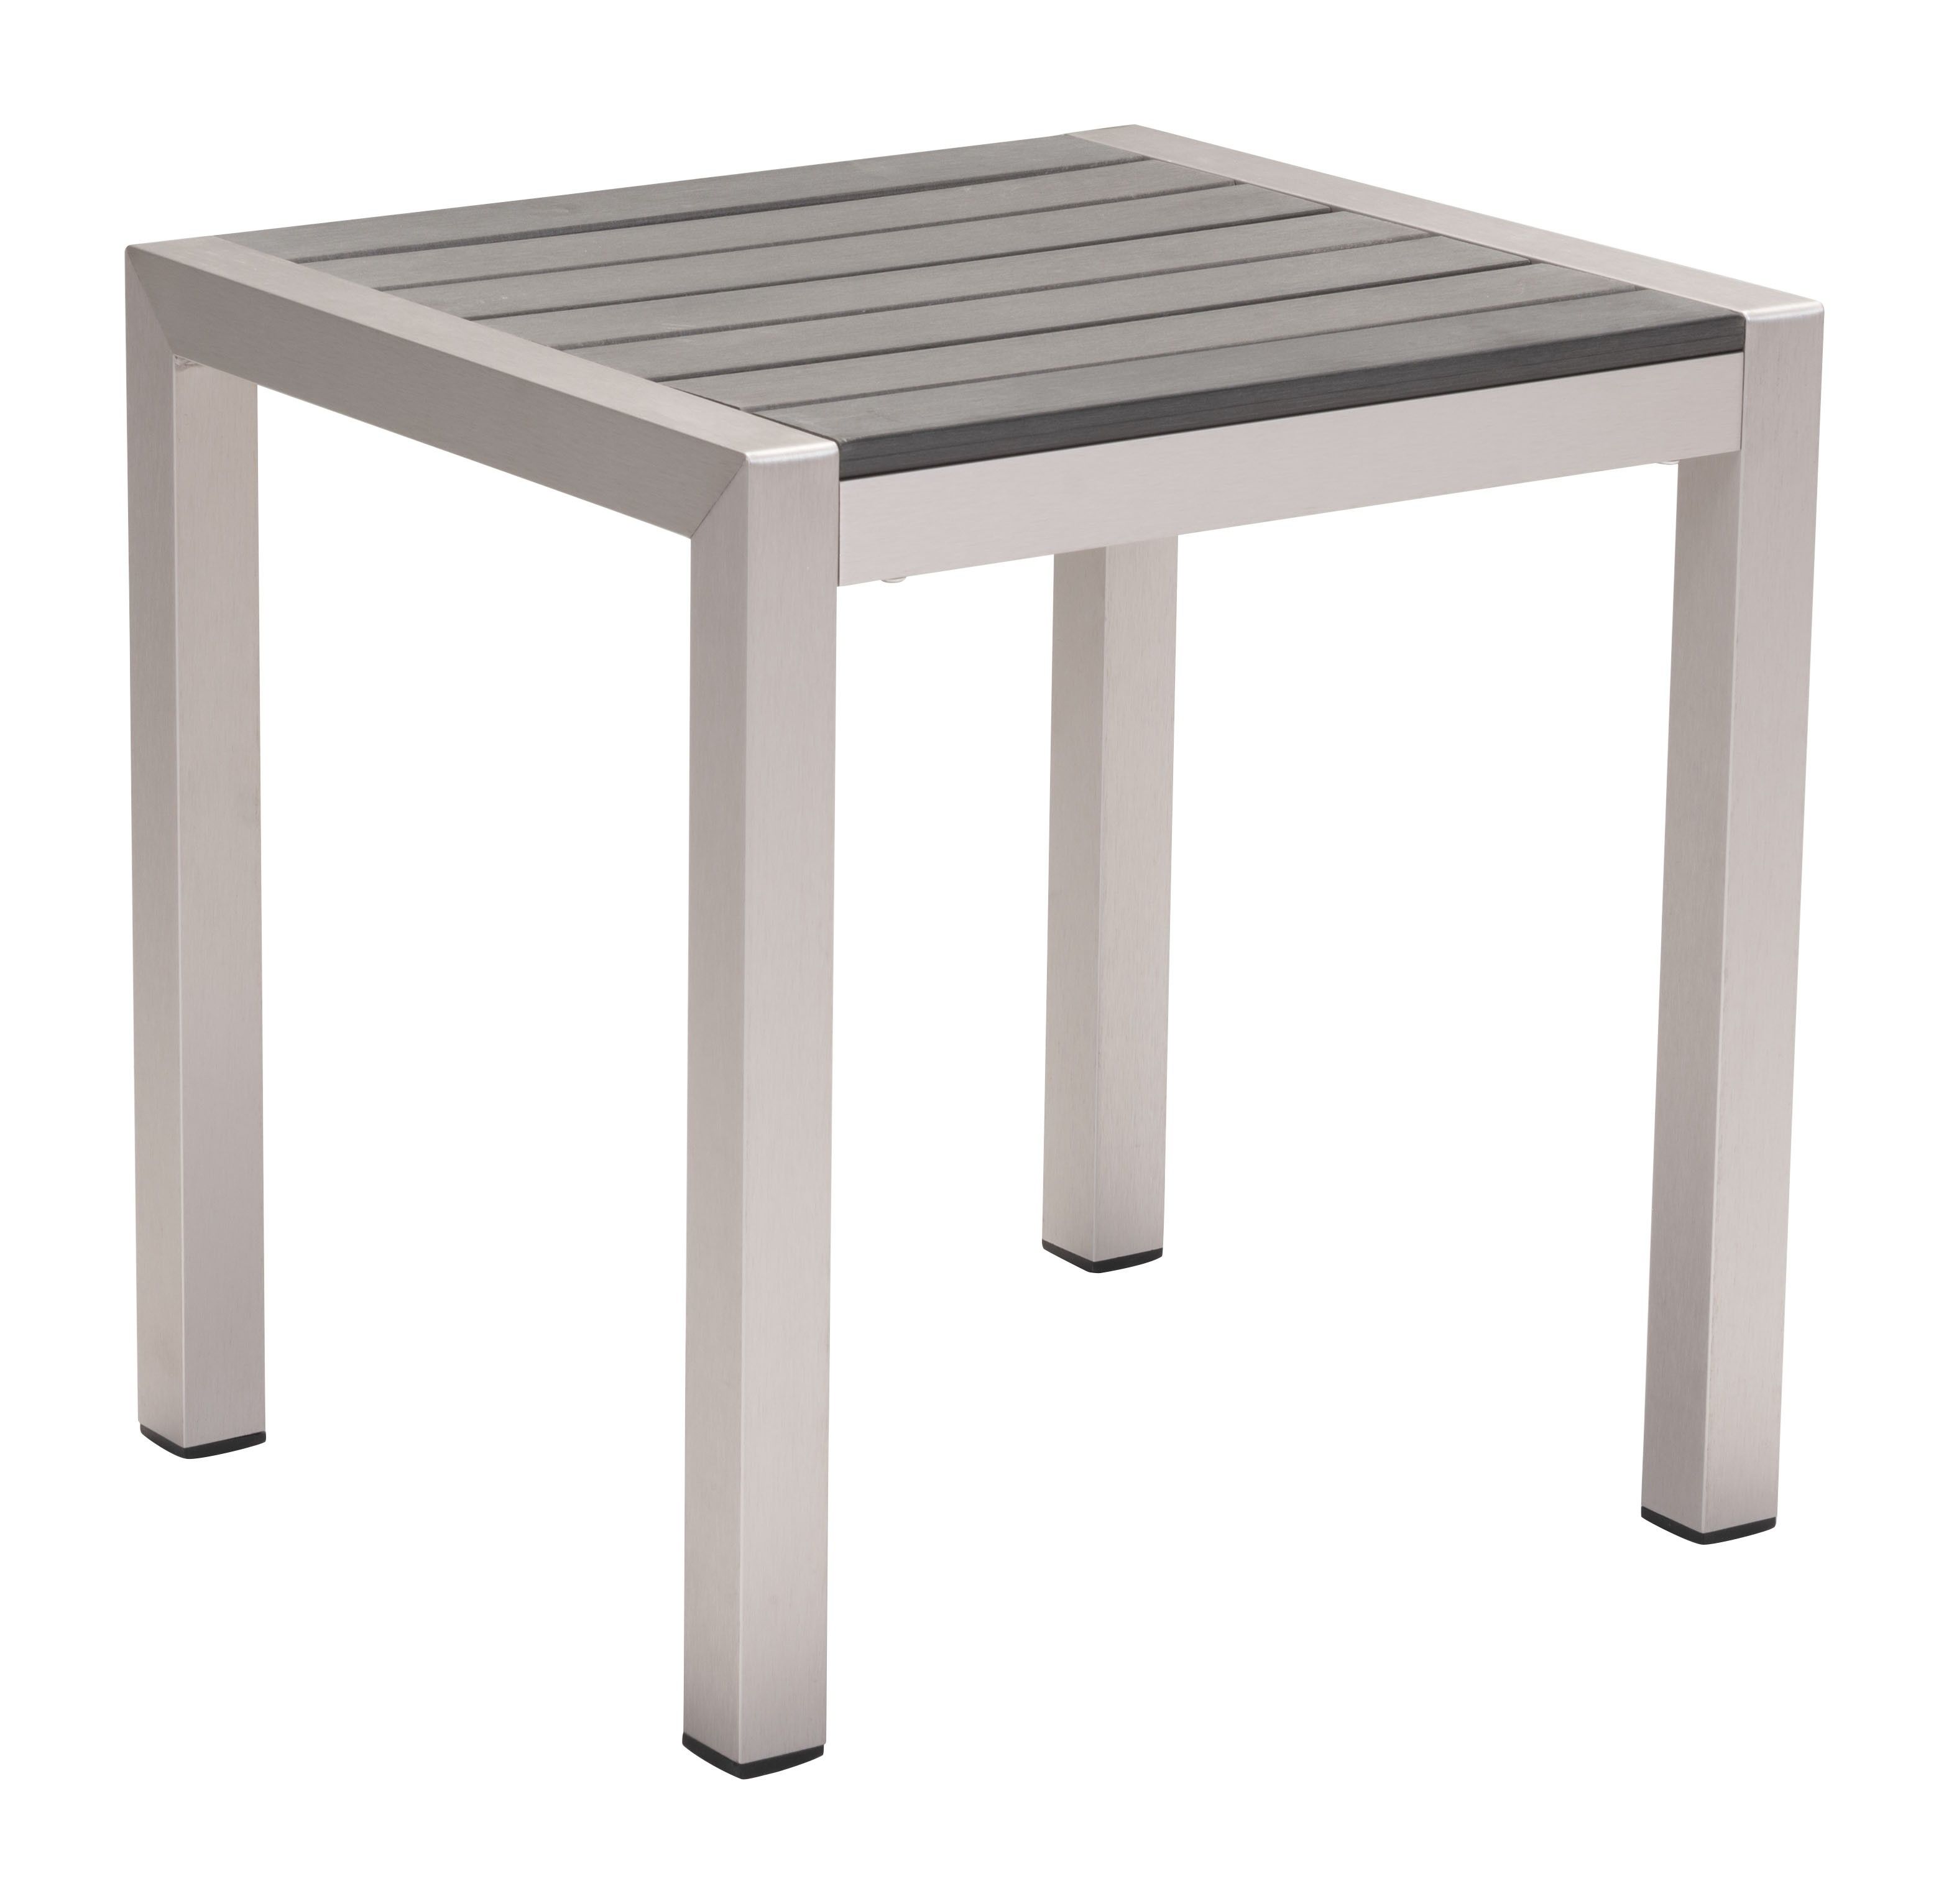 Carly Indoor/outdoor Side Table, Gray Throughout Newest Carly Rectangle Dining Tables (View 9 of 20)